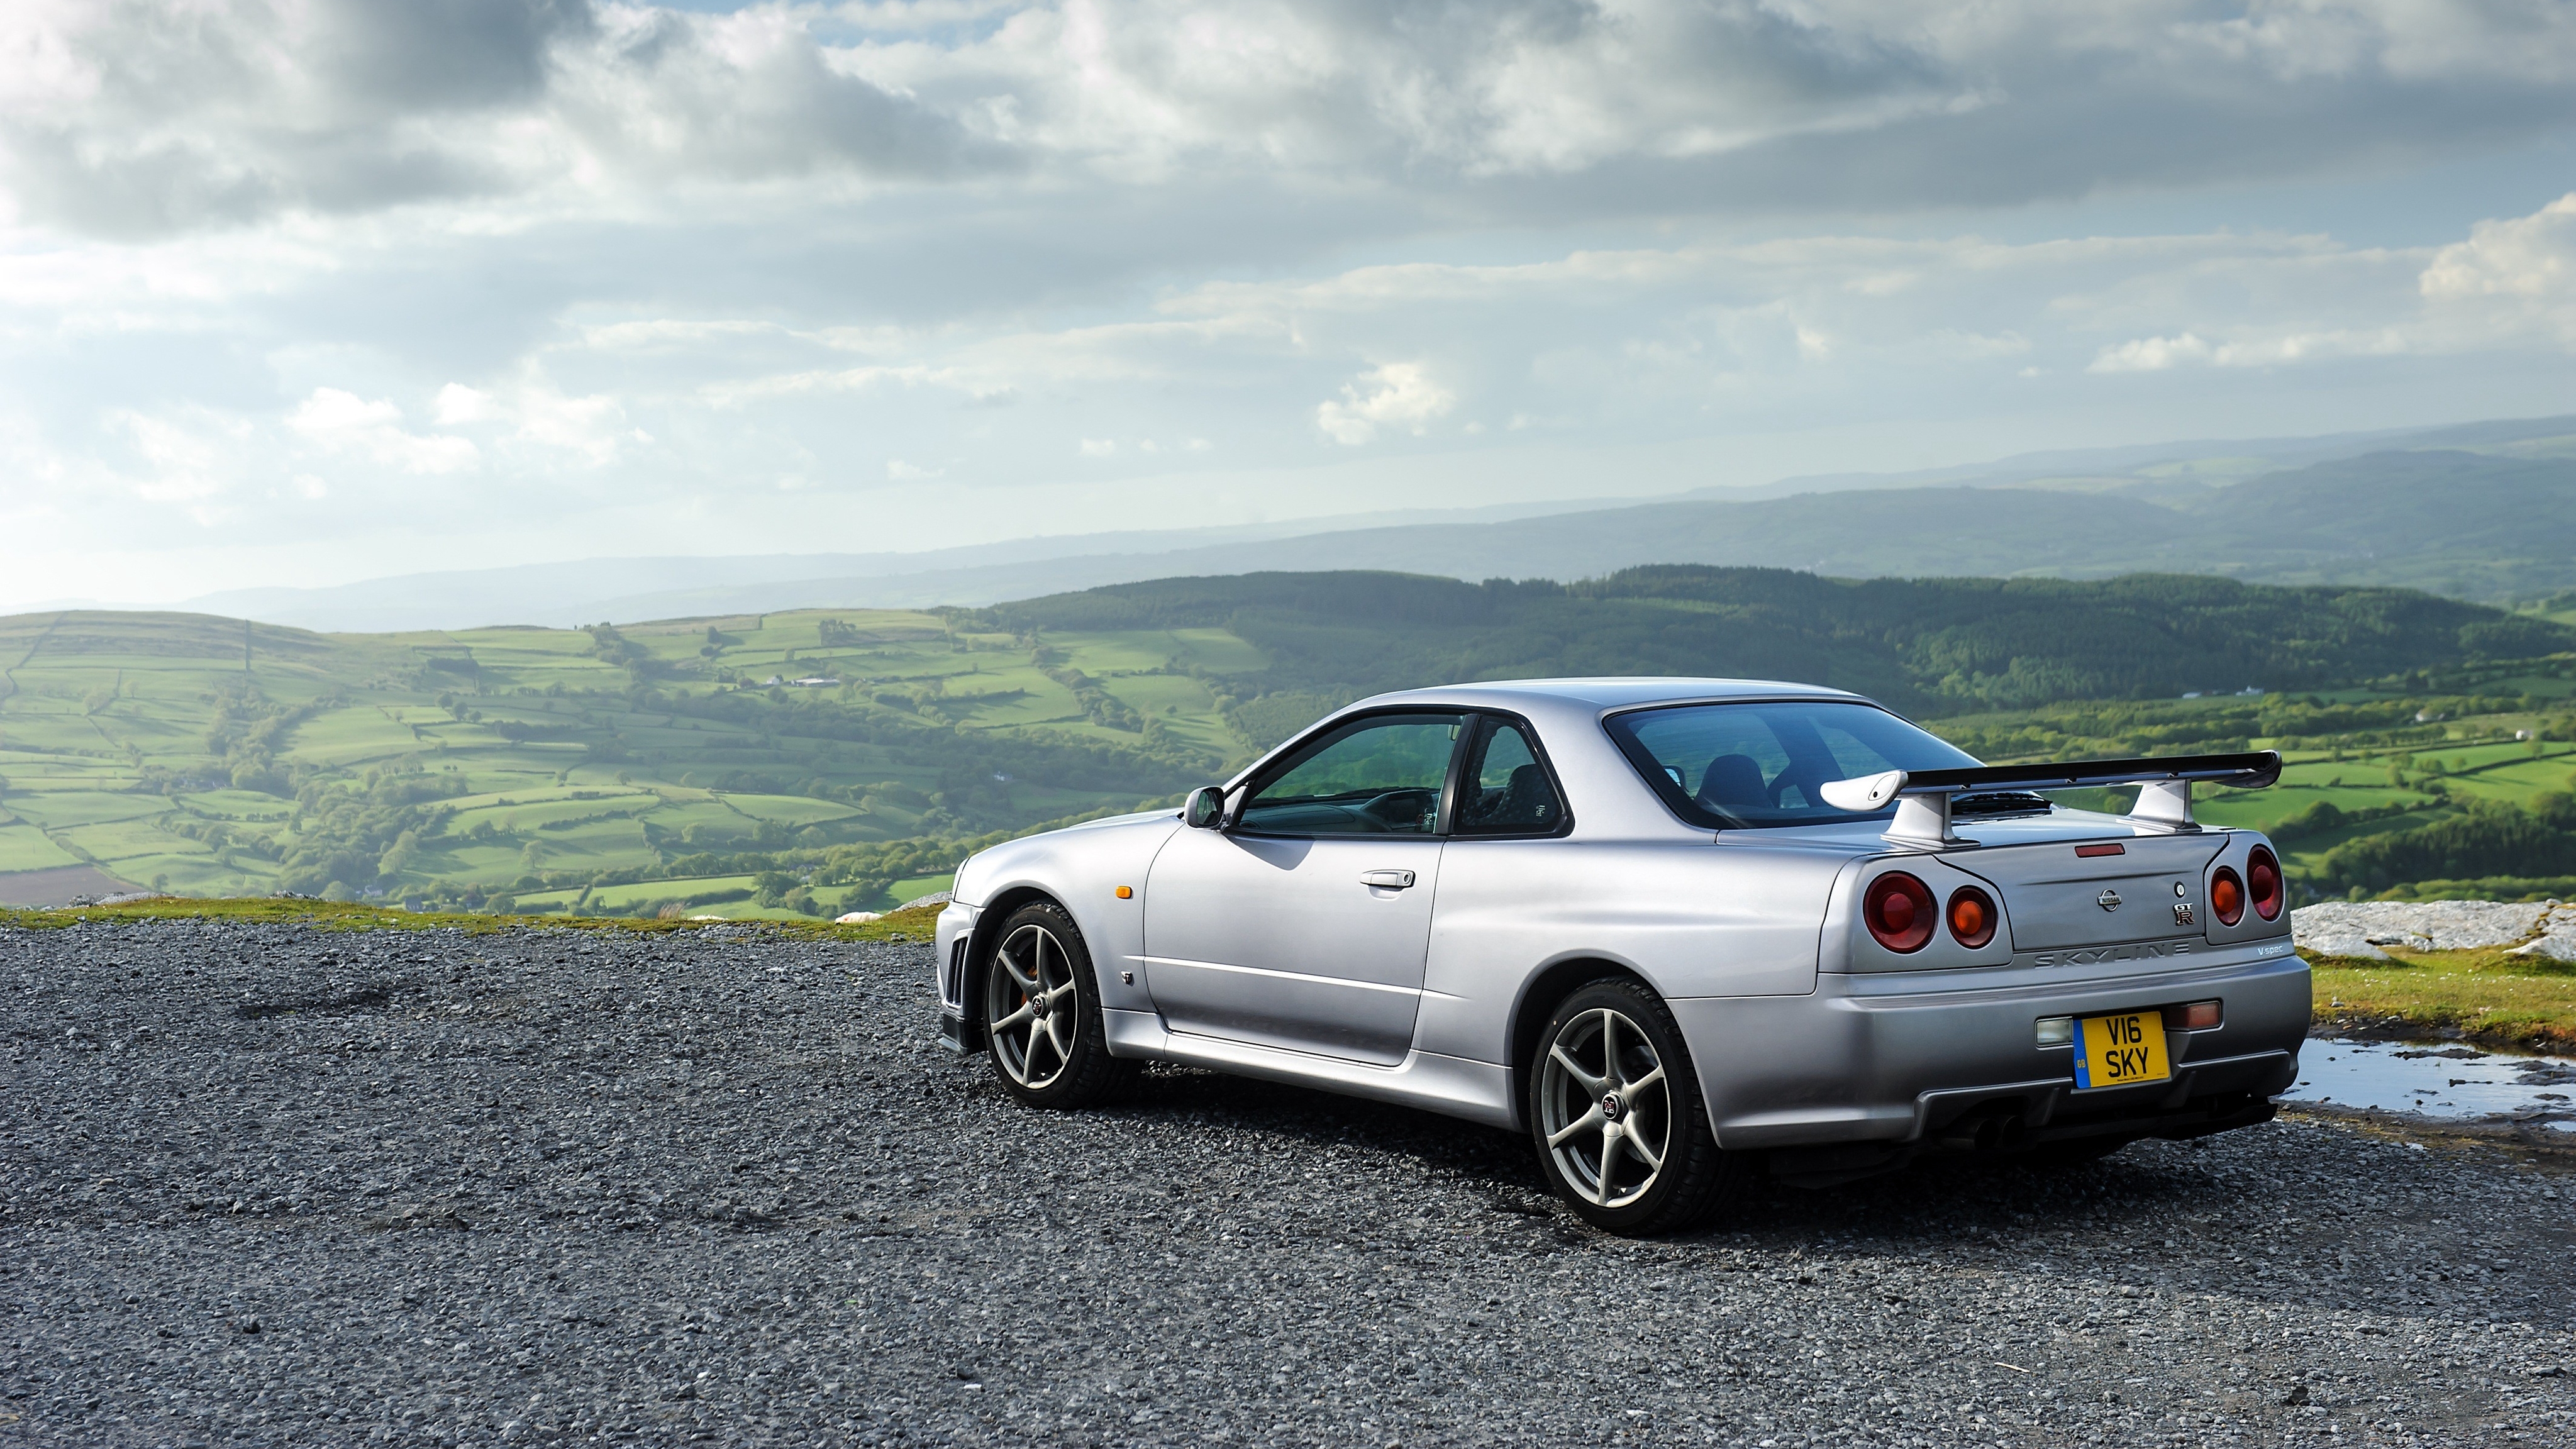 nissan, cars, side view, silver, silvery, gt r, skyline